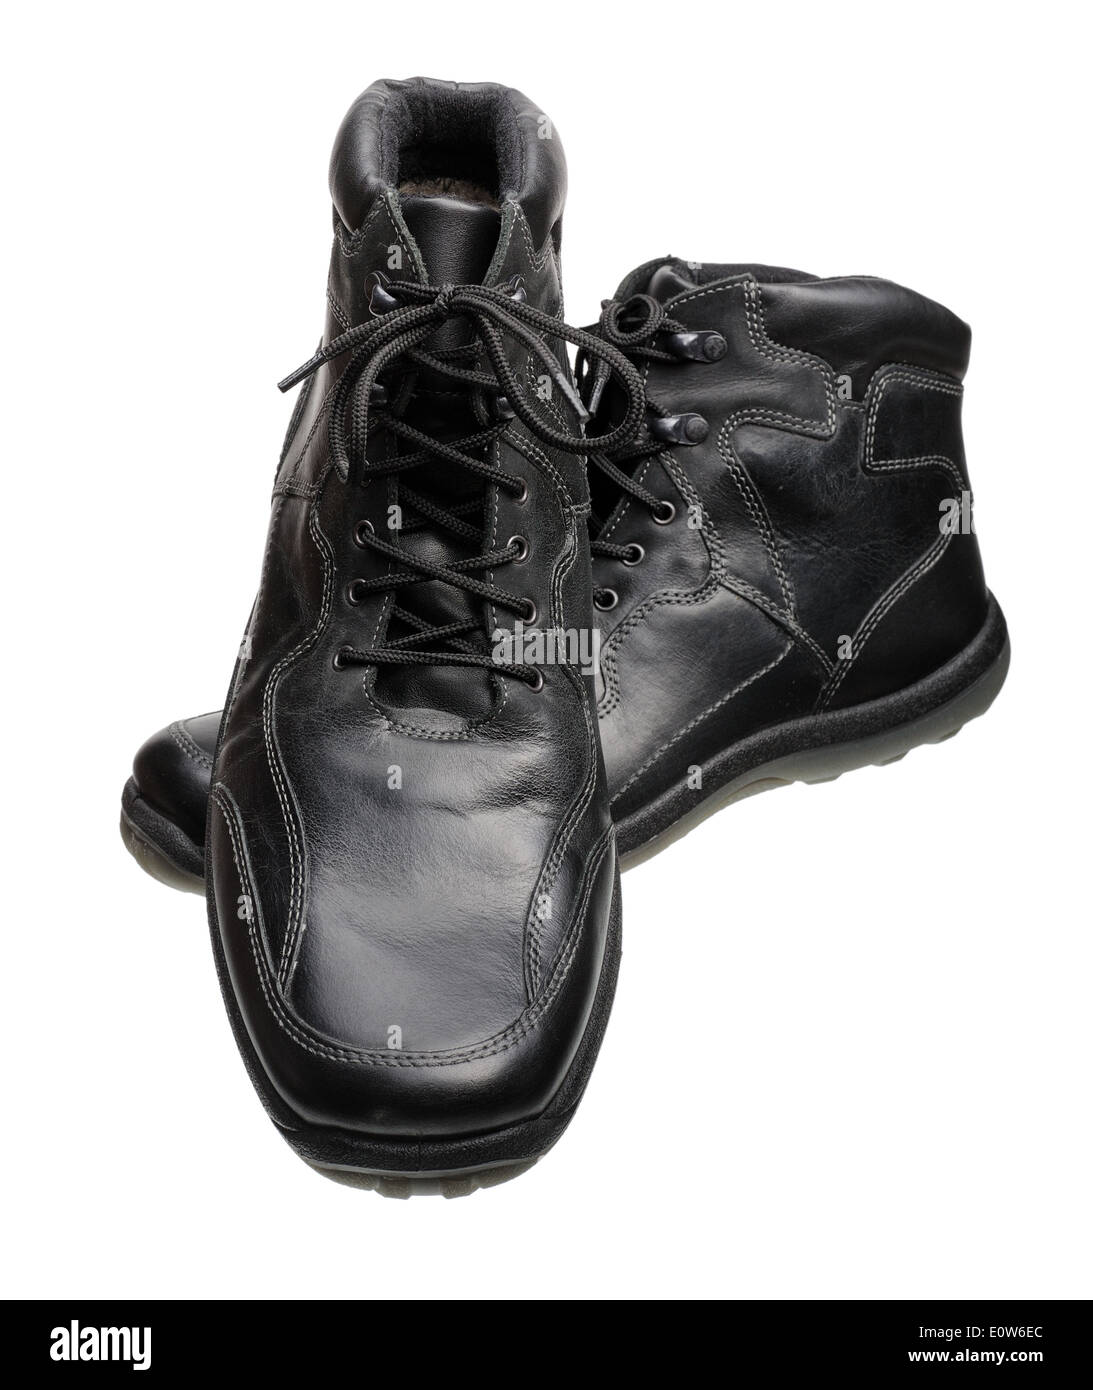 Men's black leather shoes with laces, isolated on a white background. Stock Photo